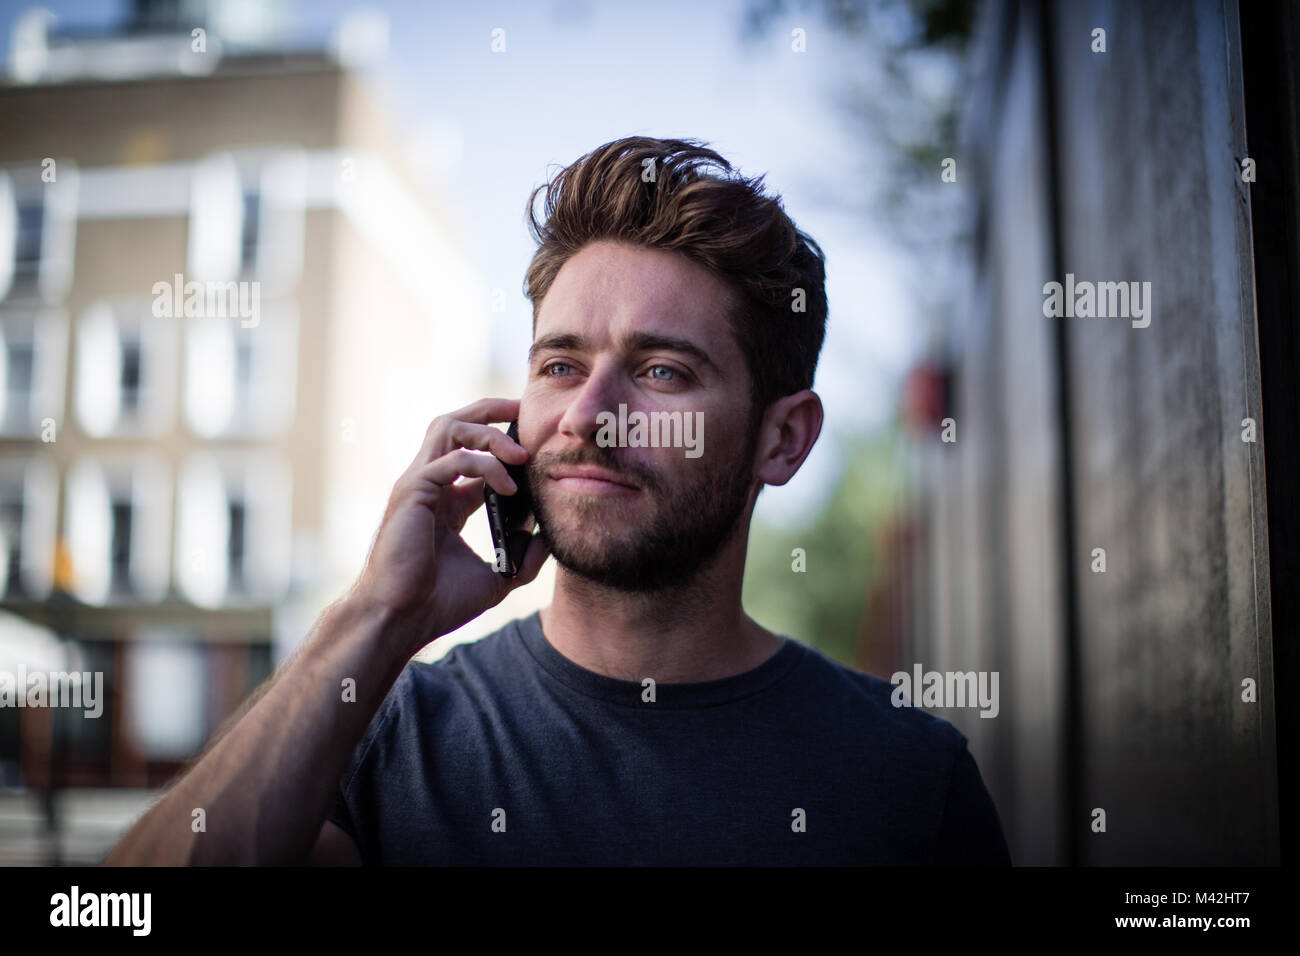 Young adult walking down street on phone Stock Photo